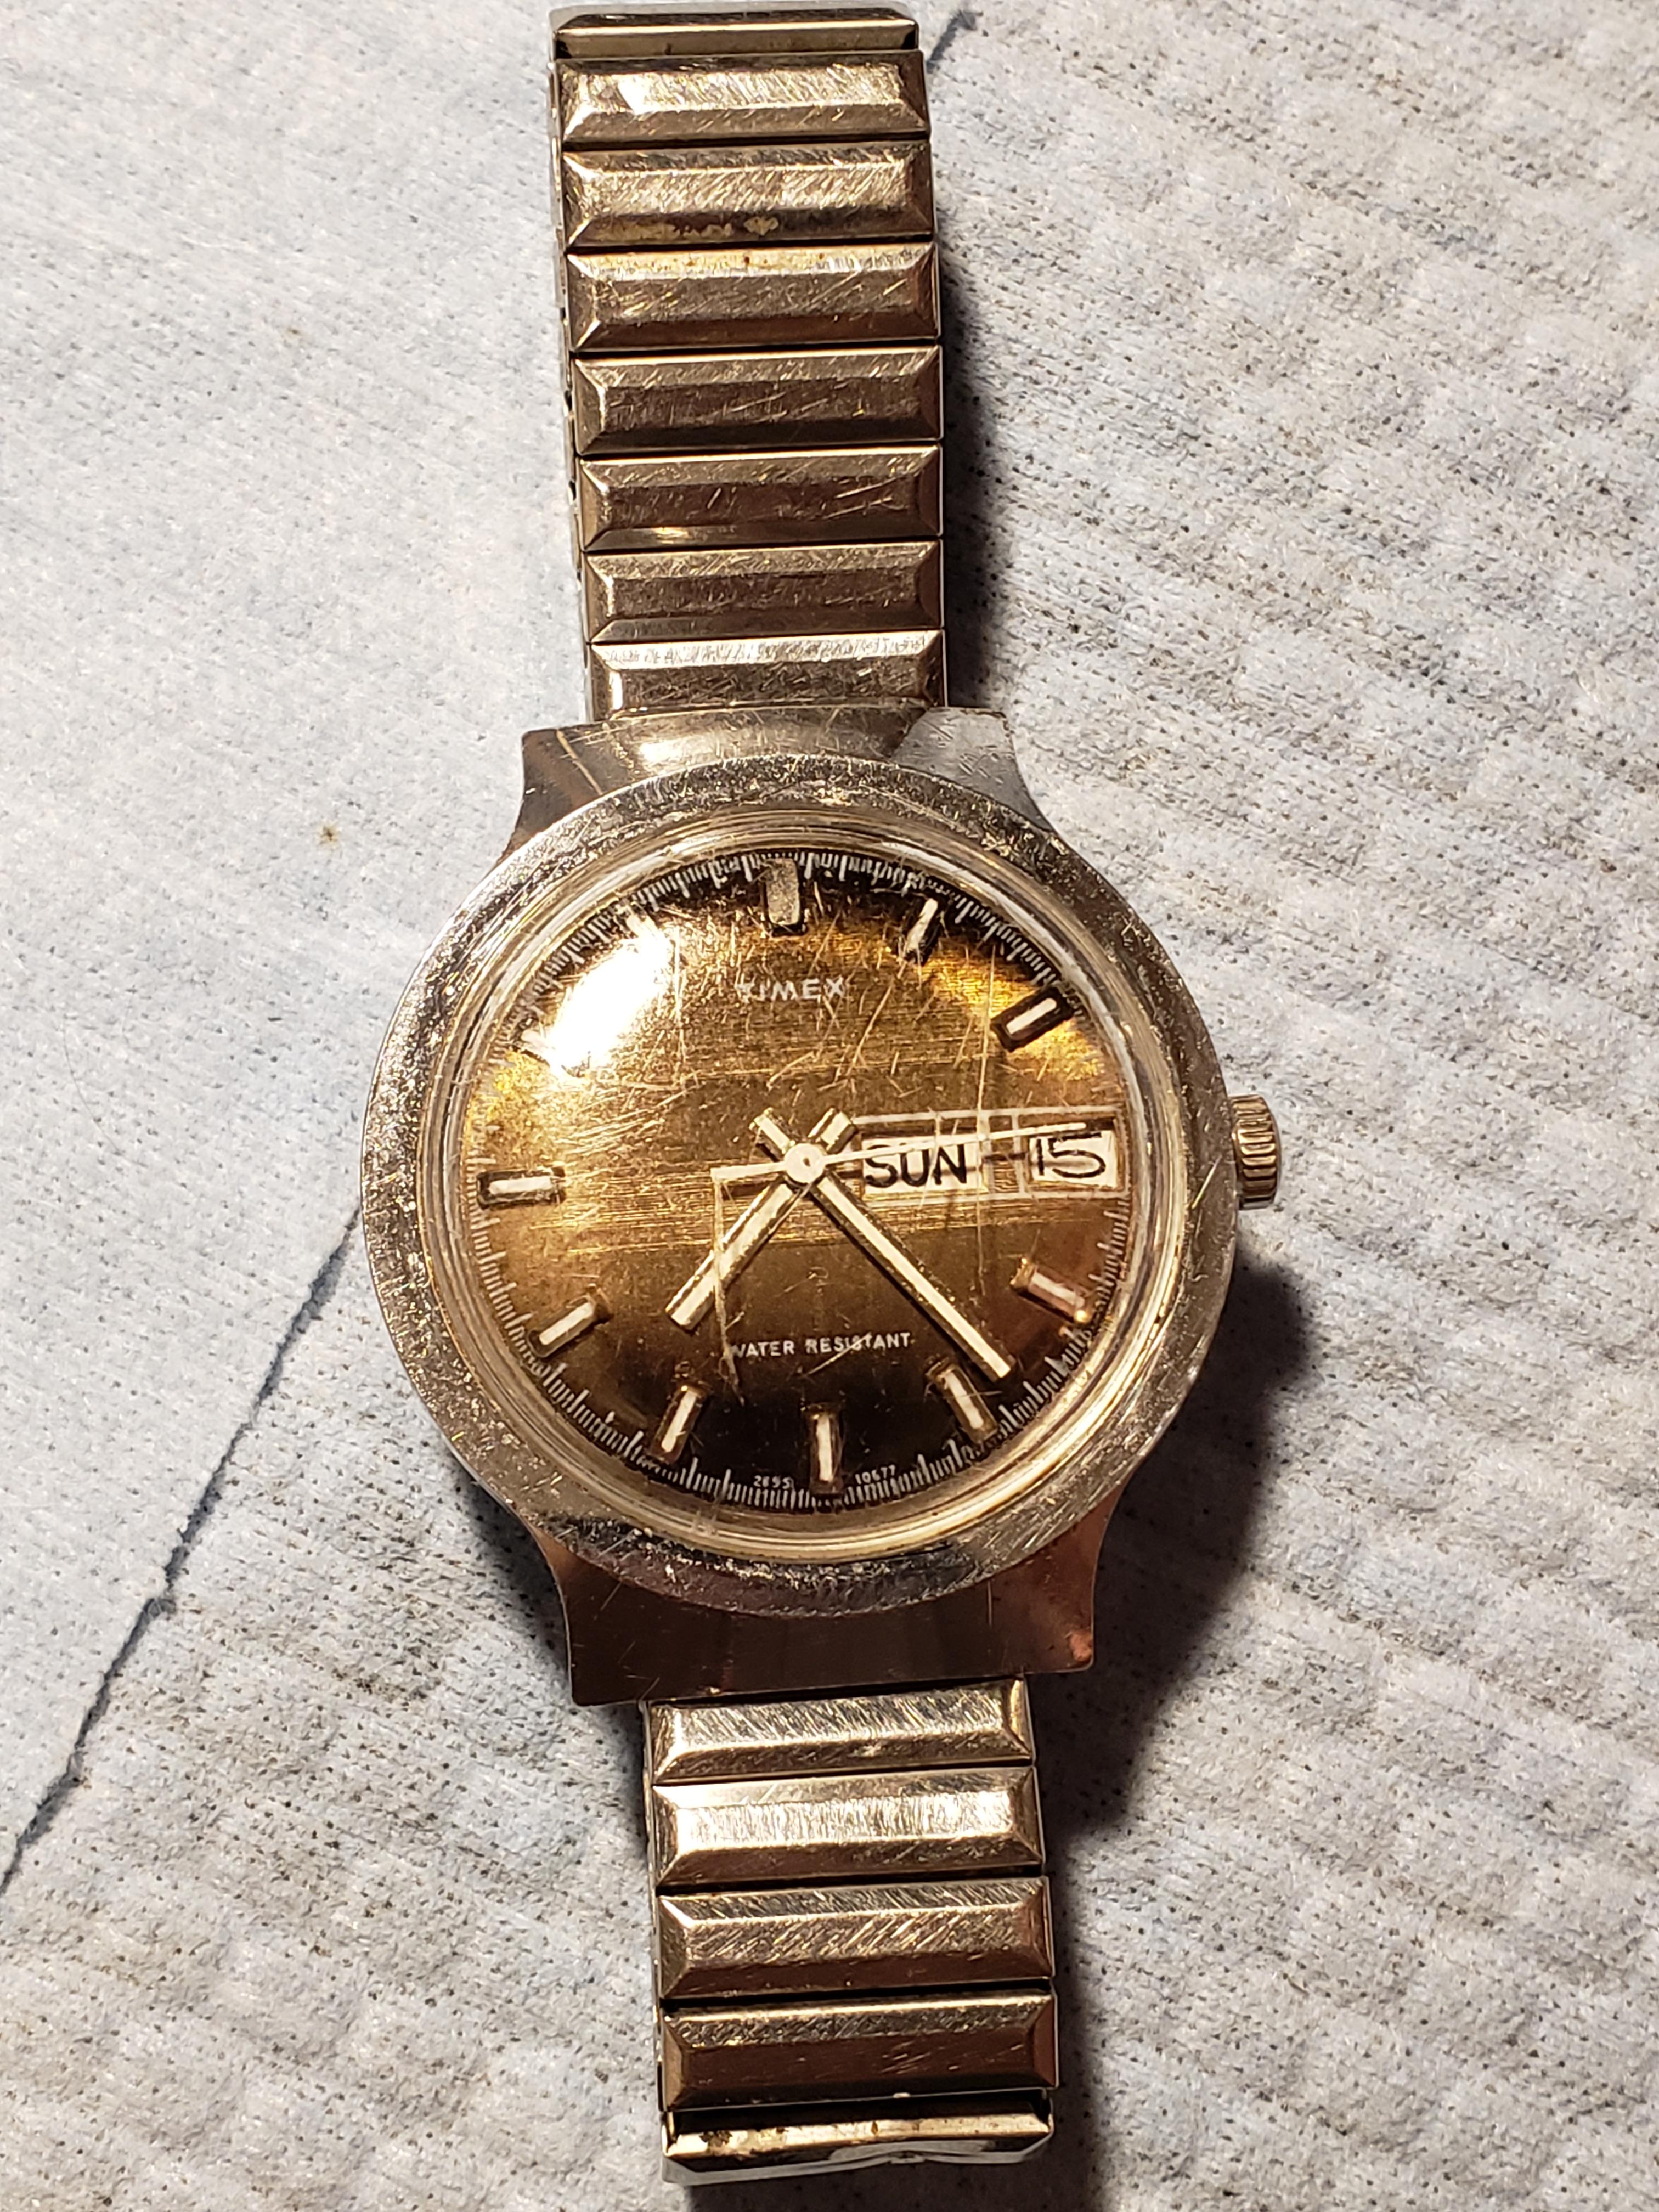 1977 Timex Marlin clean up - Your Watch Collection - Watch Repair Talk